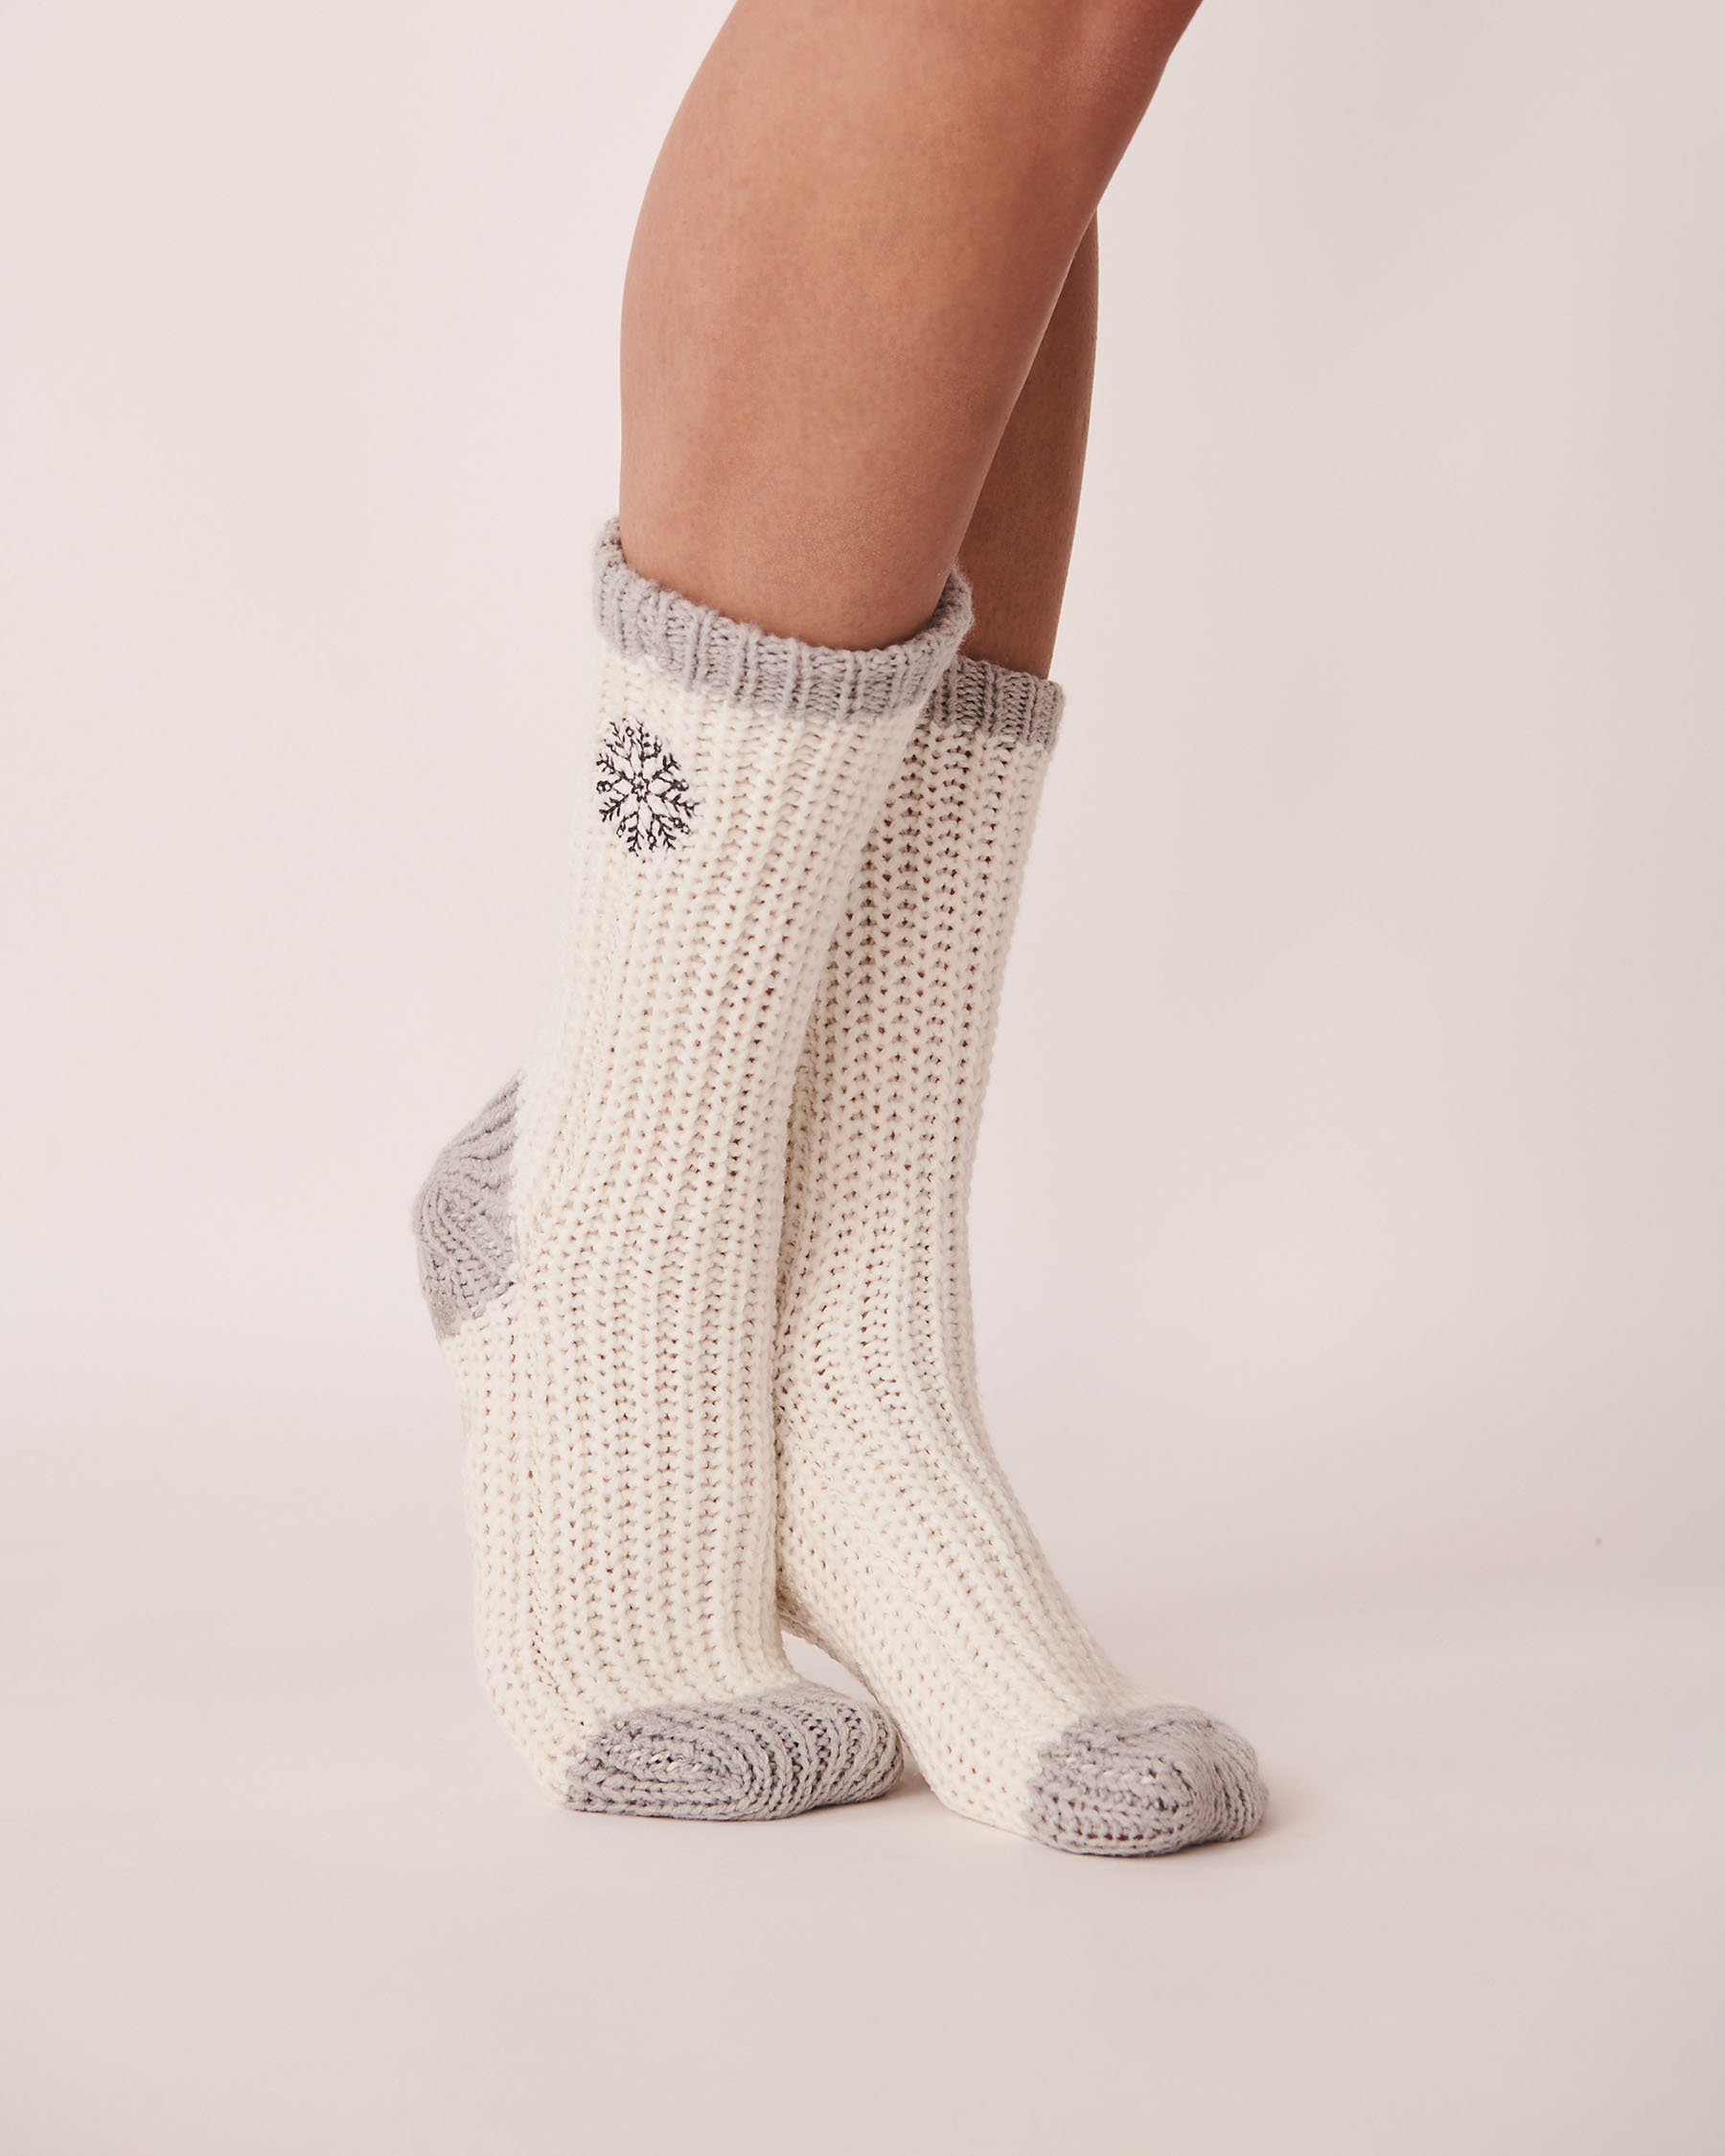 LA VIE EN ROSE Knitted Socks with winter Embroidery Snow flake 40700245 - View1